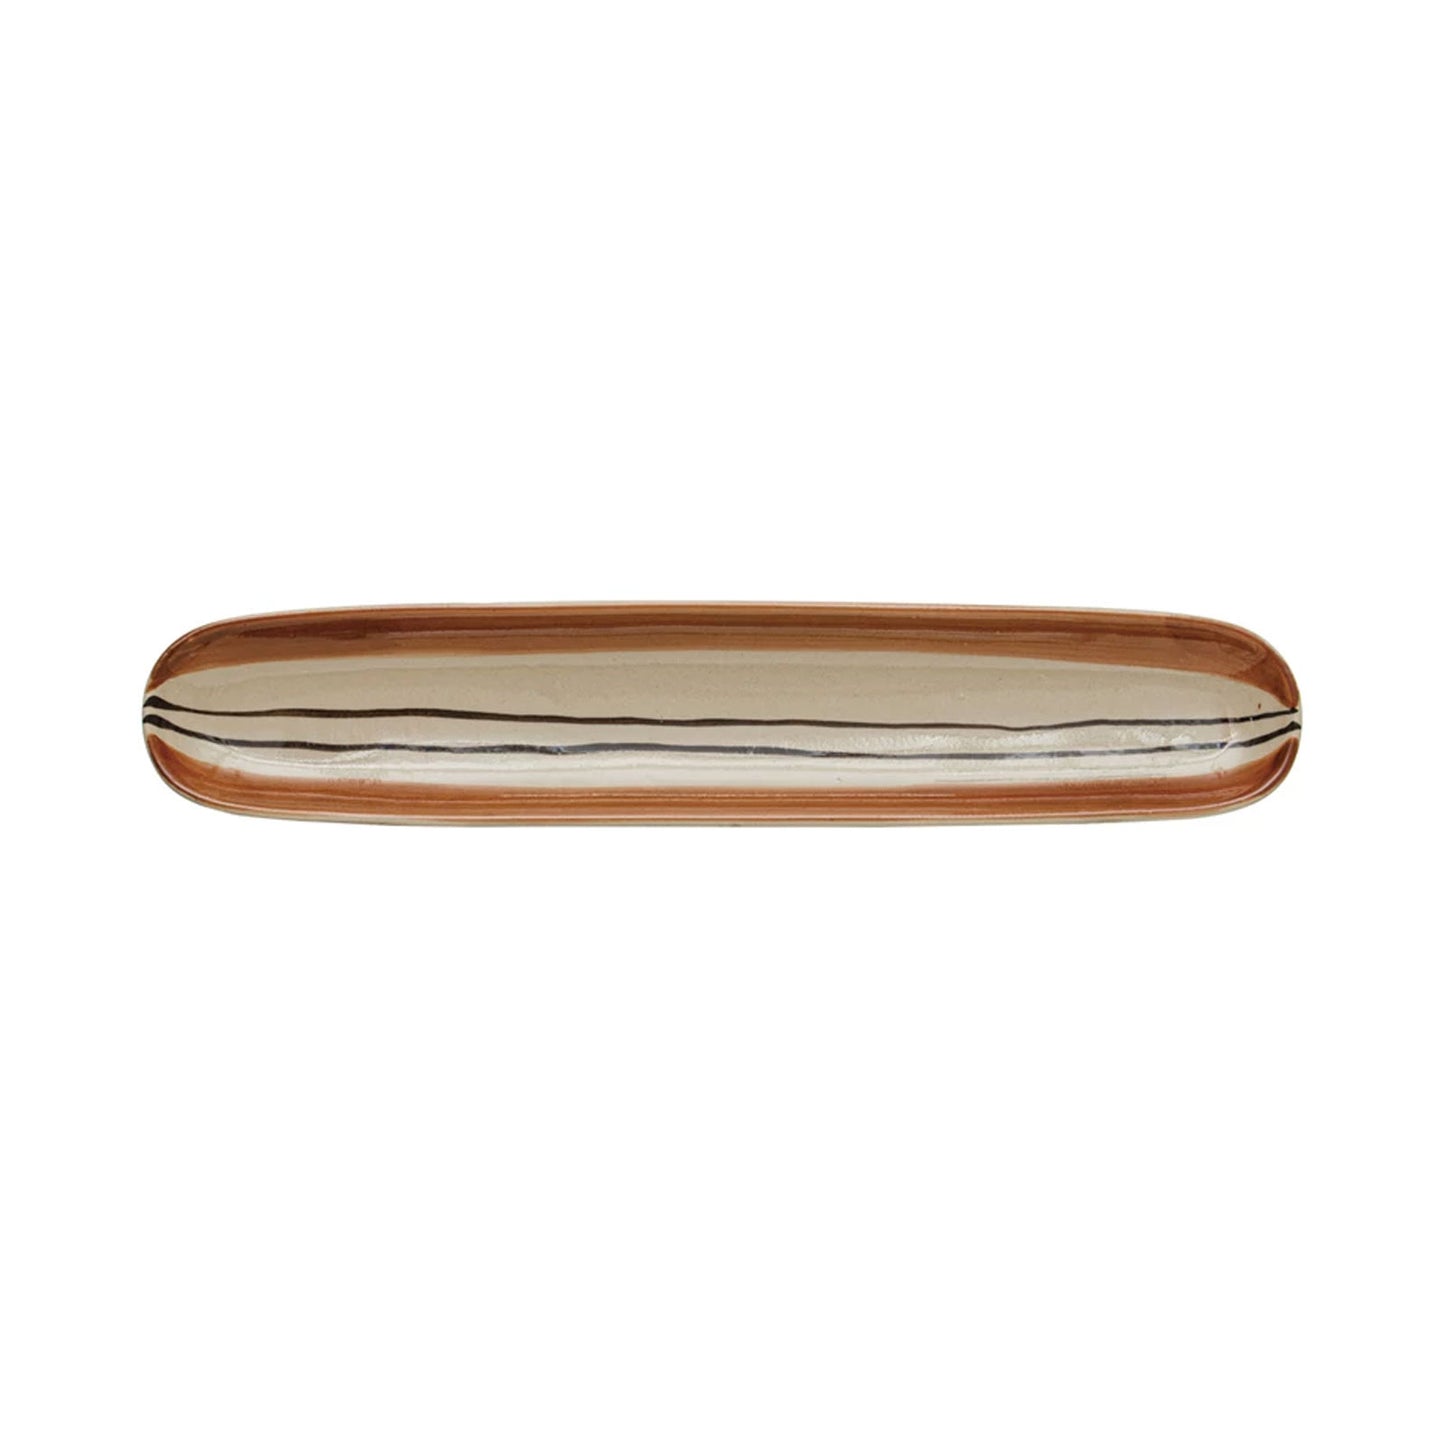 Hand-Painted Oval Stoneware Tray with Brown and Black Stripes